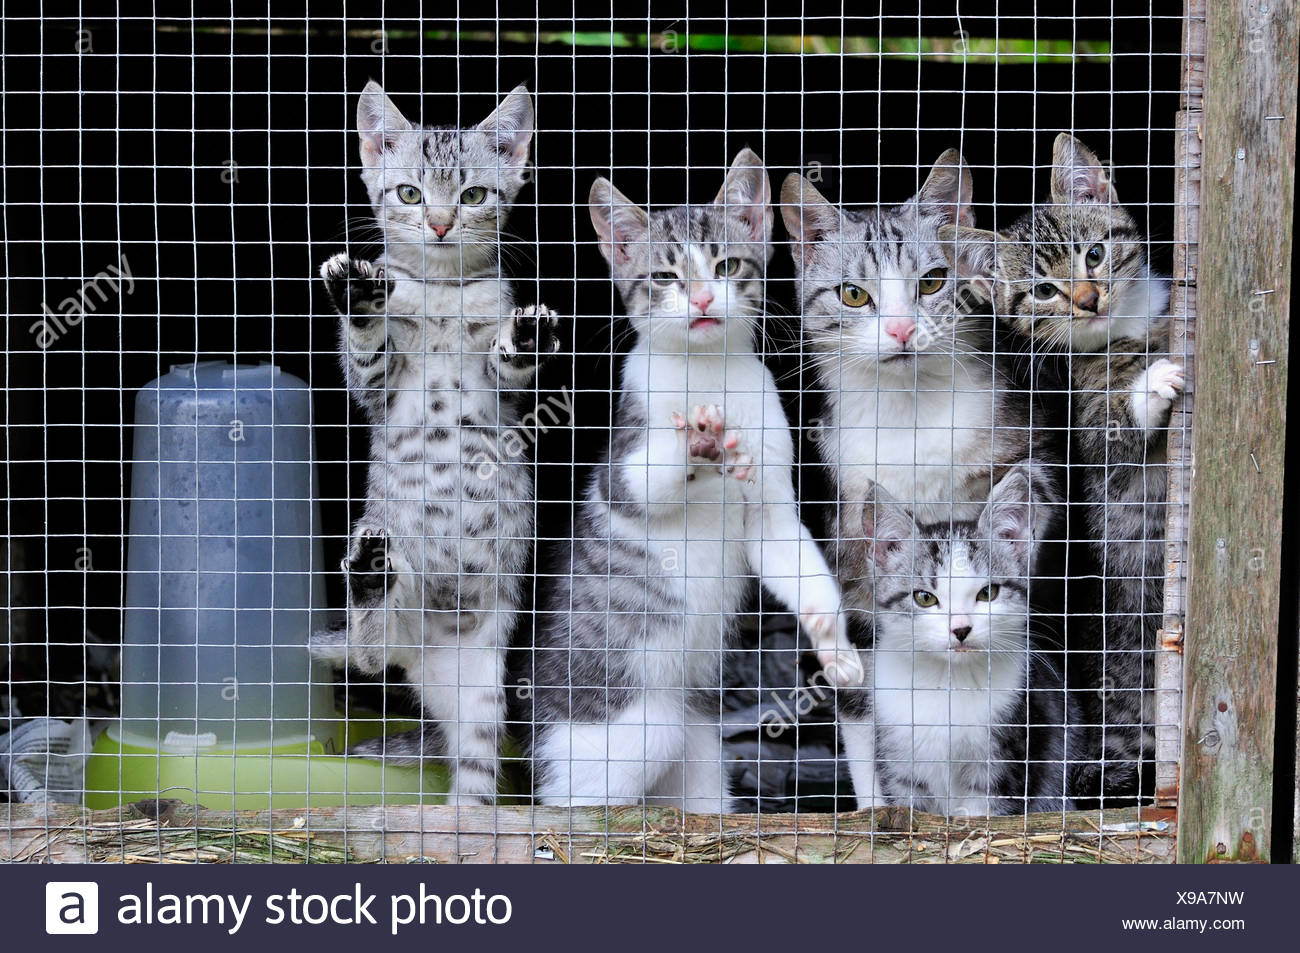 Kittens in cage Stock Photo: 281123413 - Alamy